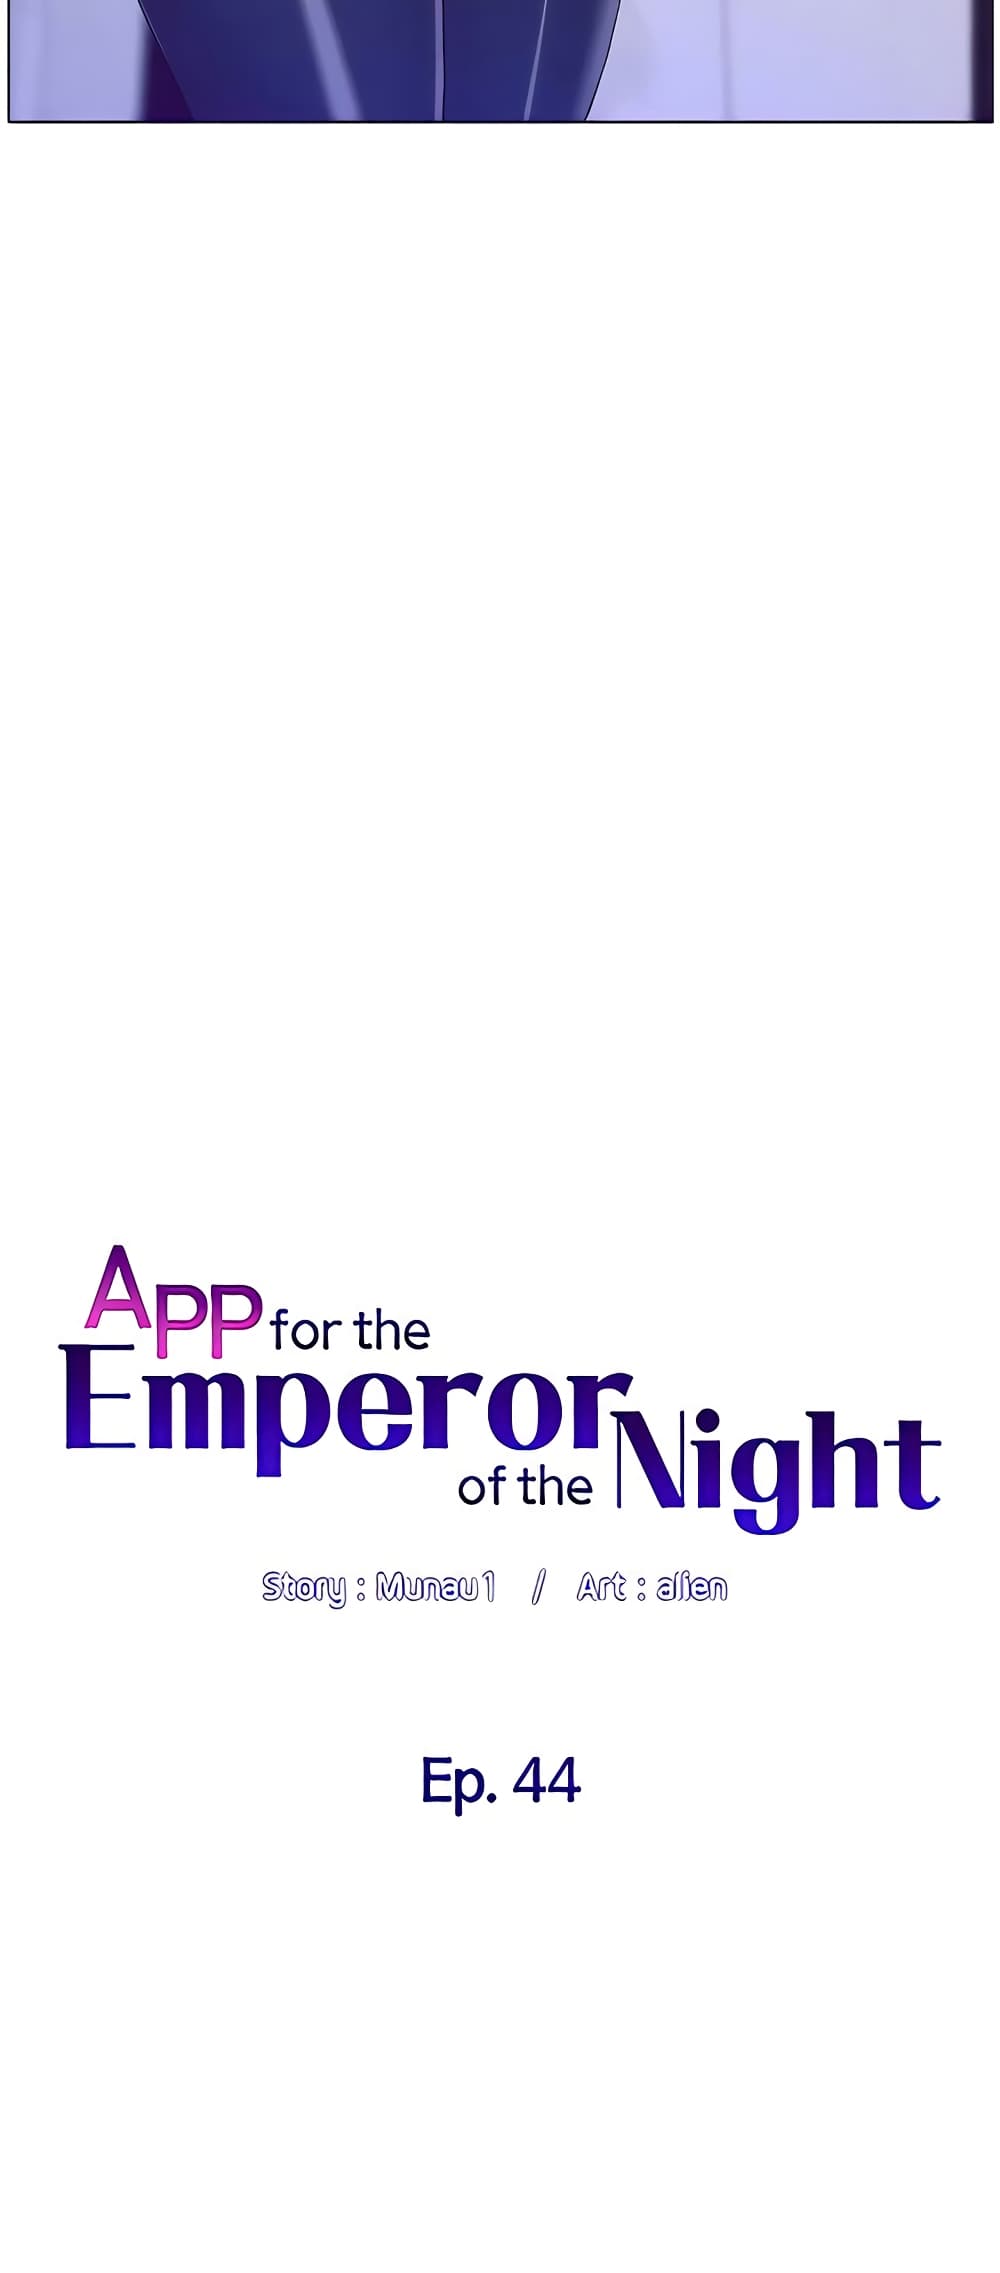 APP for the Emperor of the Night 44-44